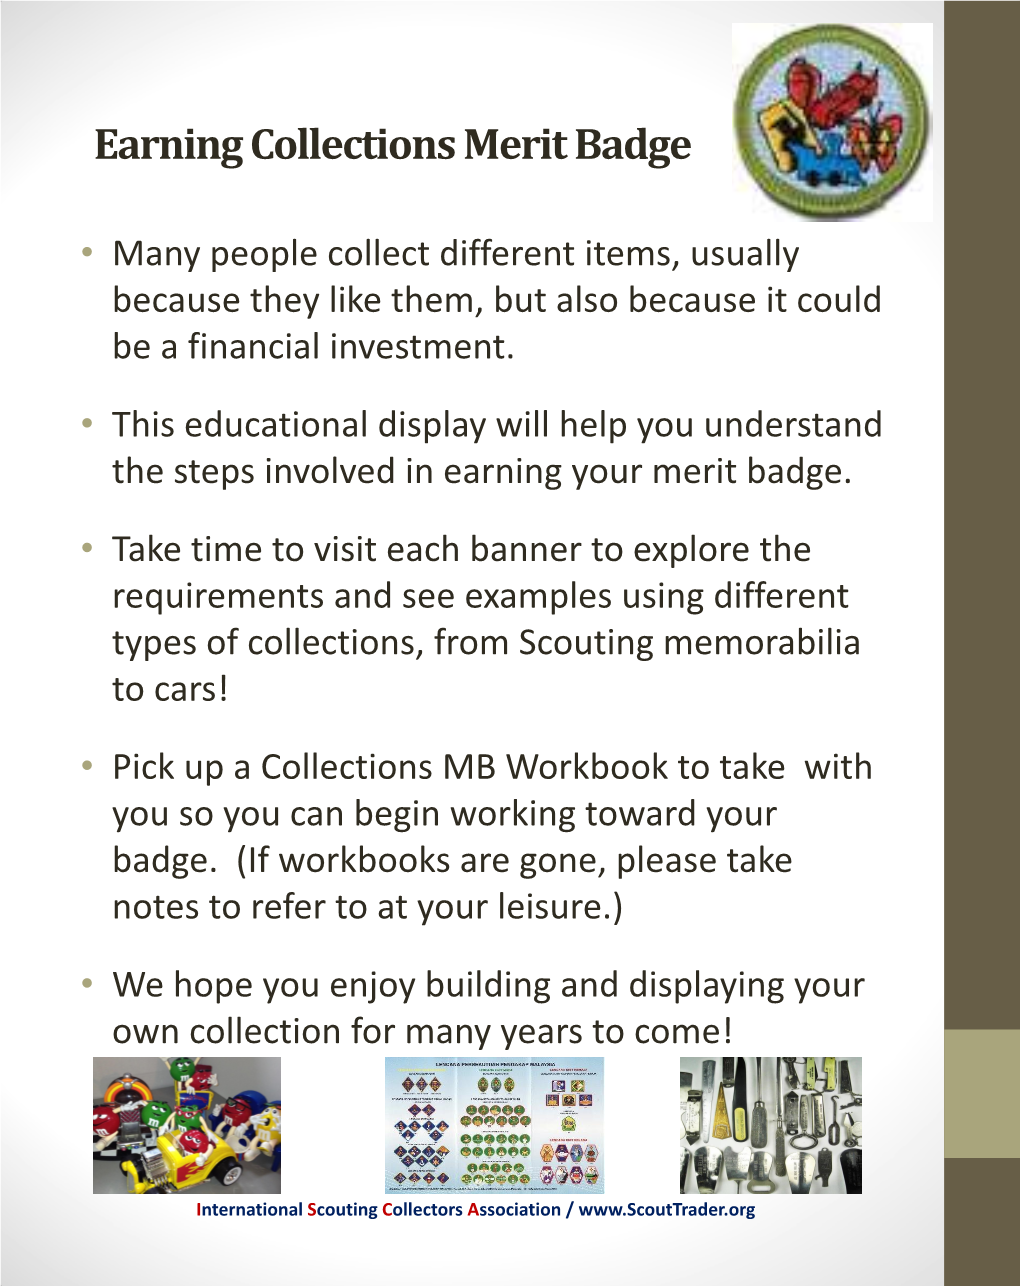 Collections Merit Badge Presentation Banners